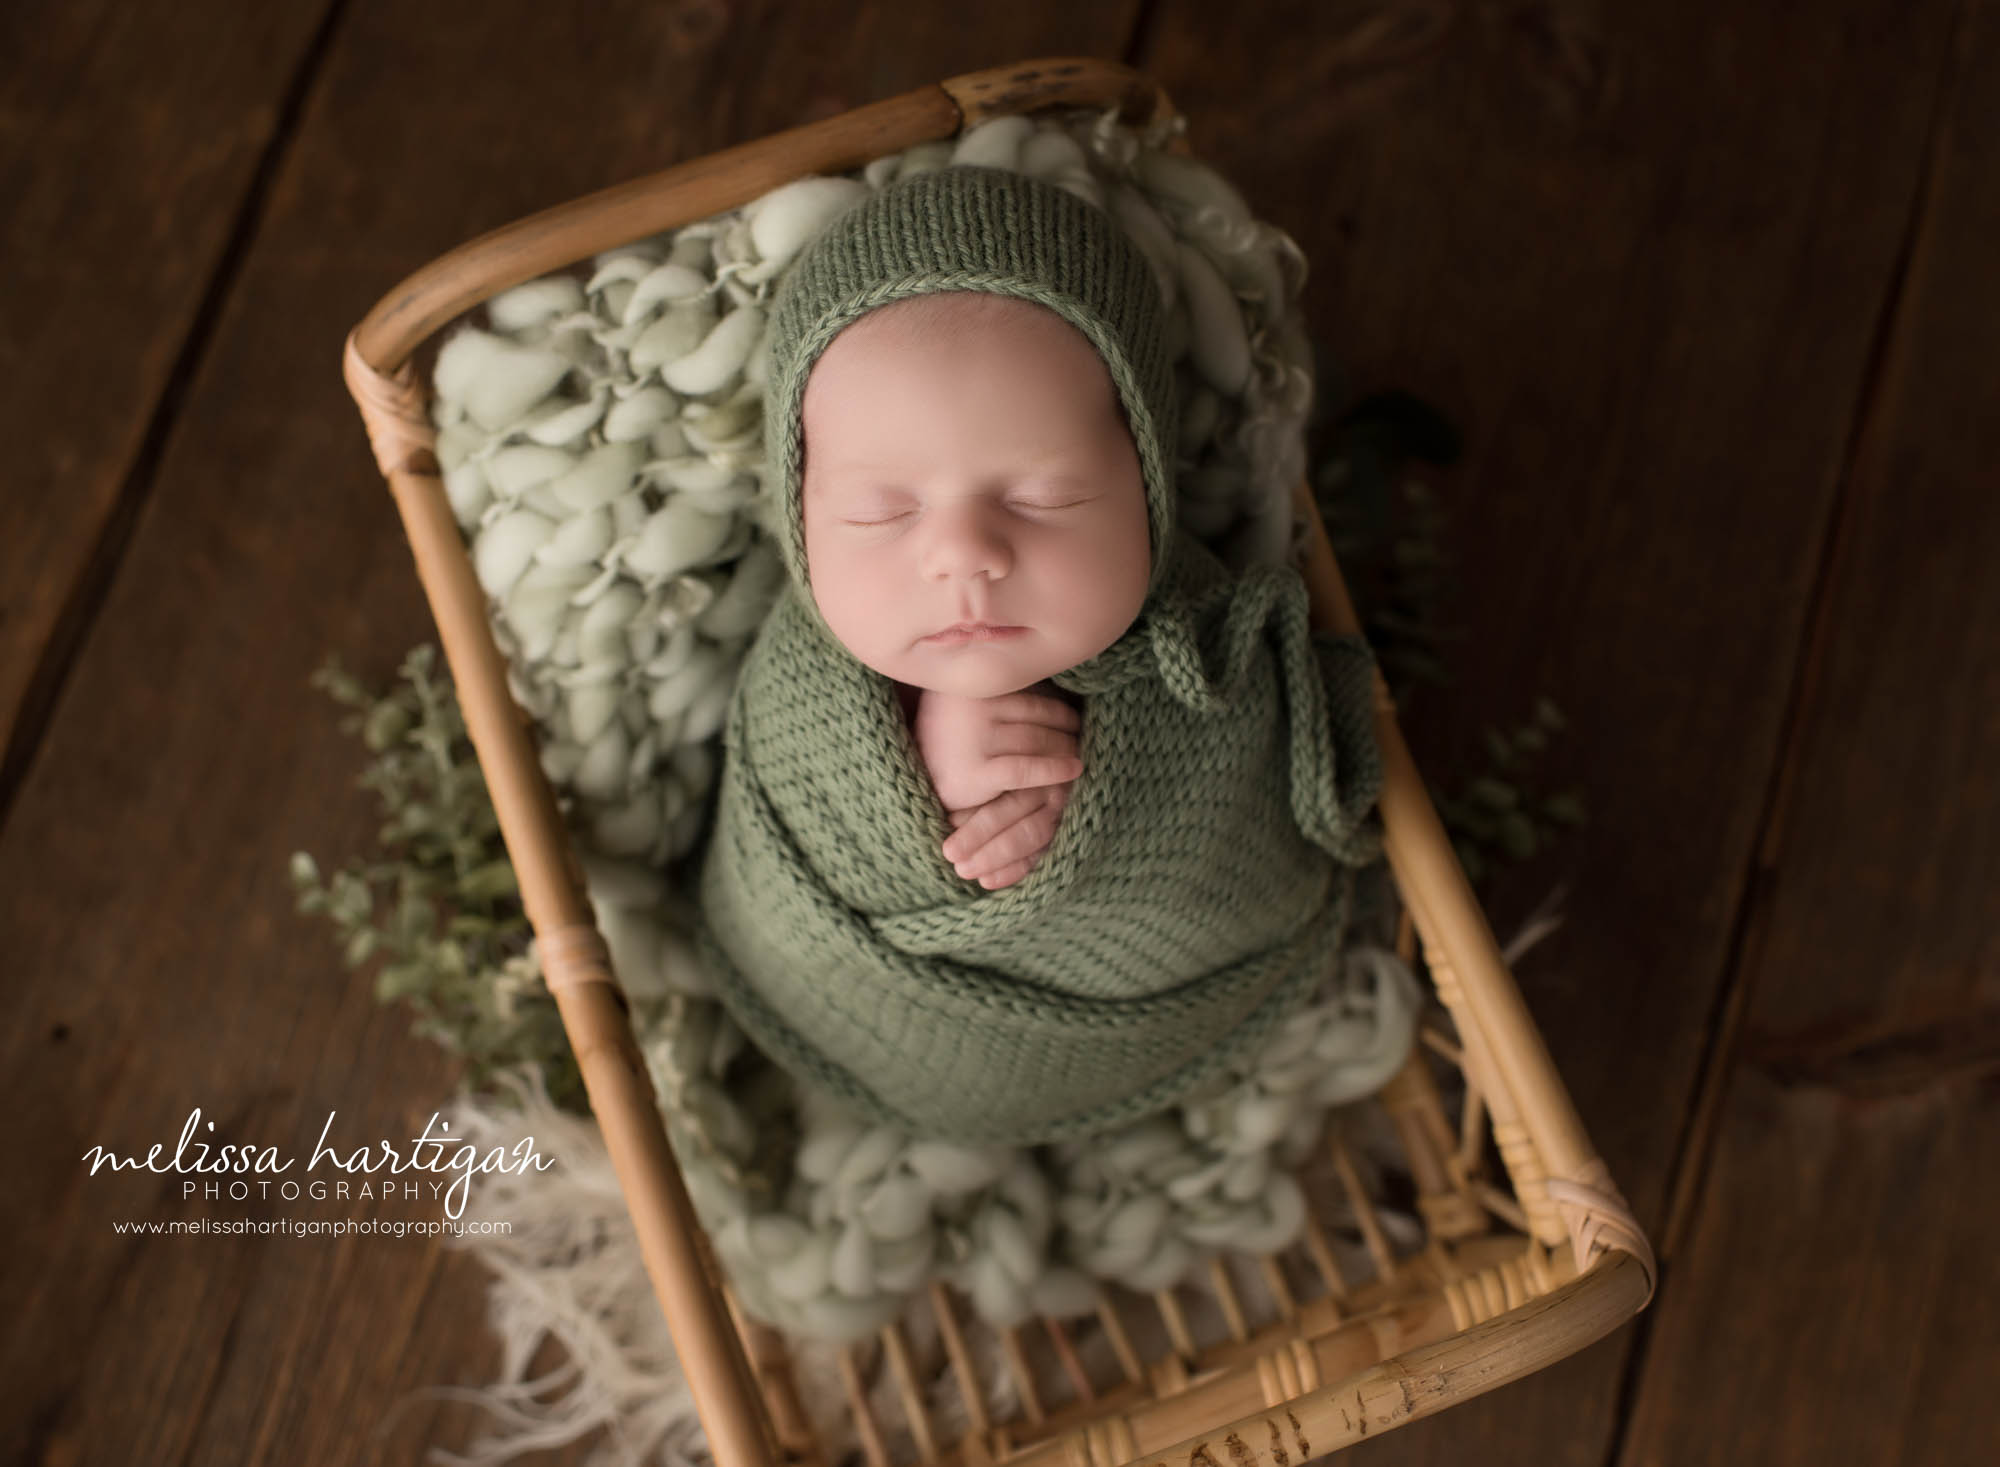 newborn baby girl posed in basket with sage green knitted wrap and matching bonnet